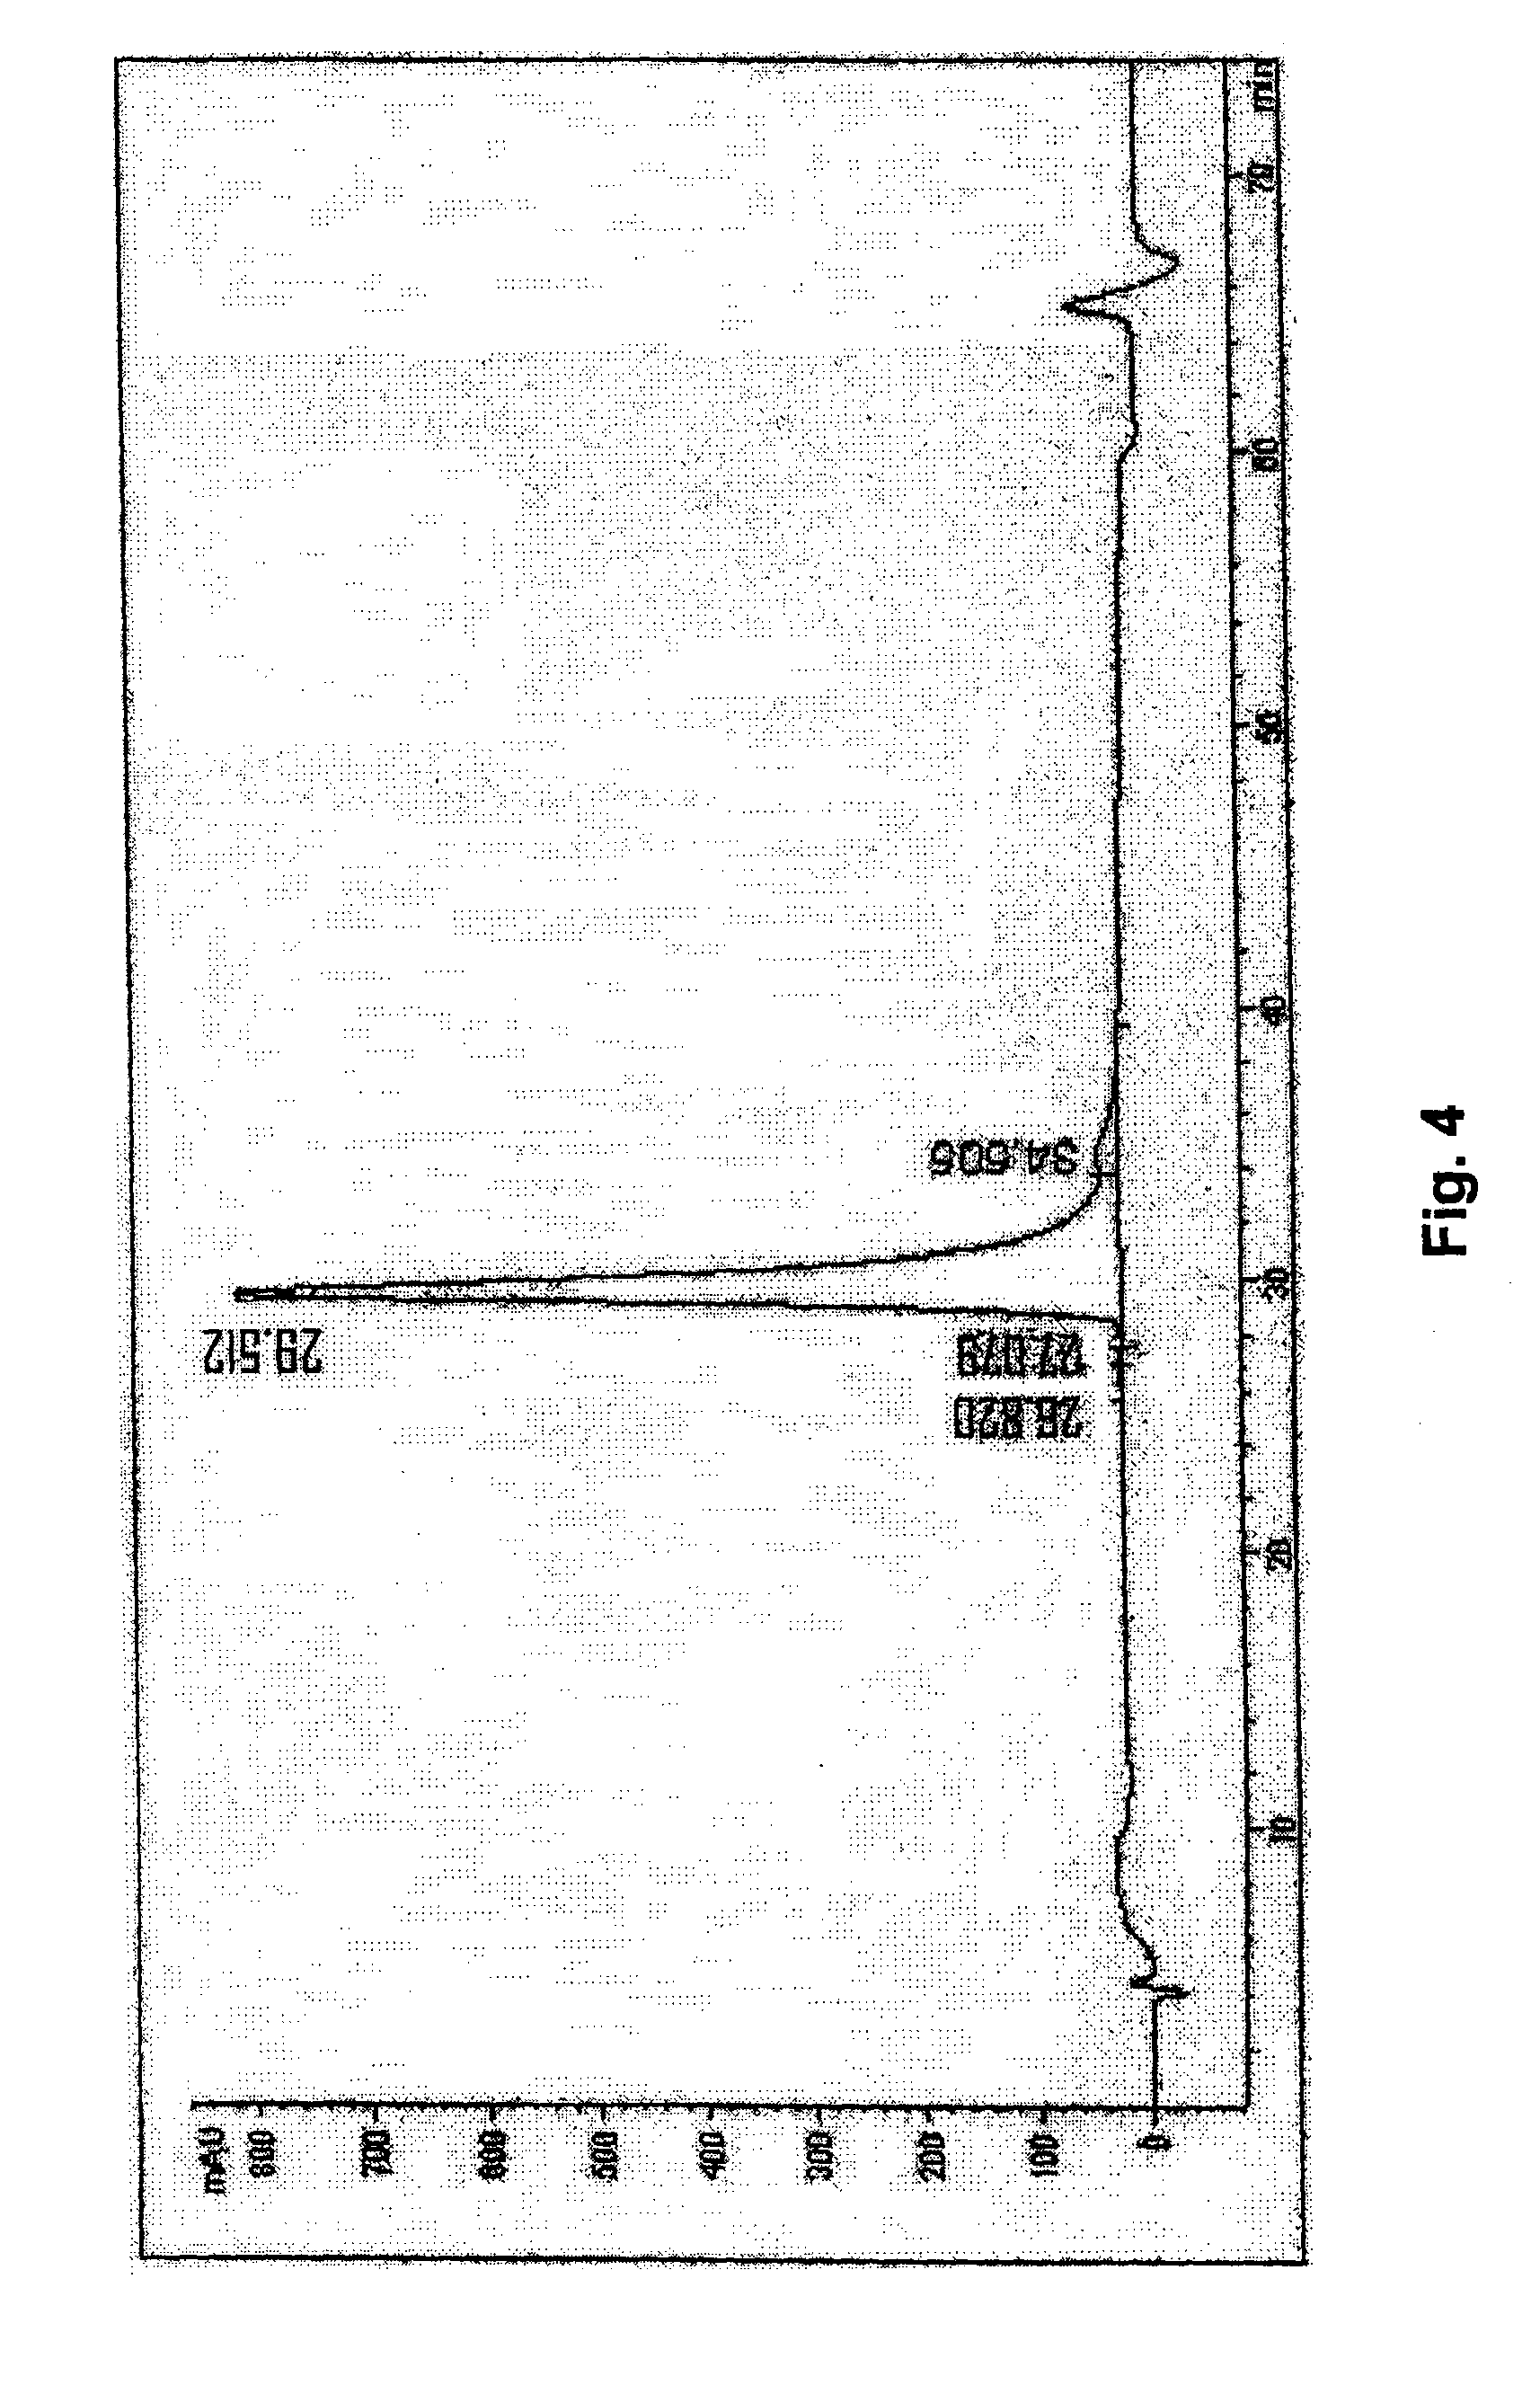 Derivatives of recombinant proteins, homo-multimers of granulocyte colony-stimulating factor and method of preparation thereof